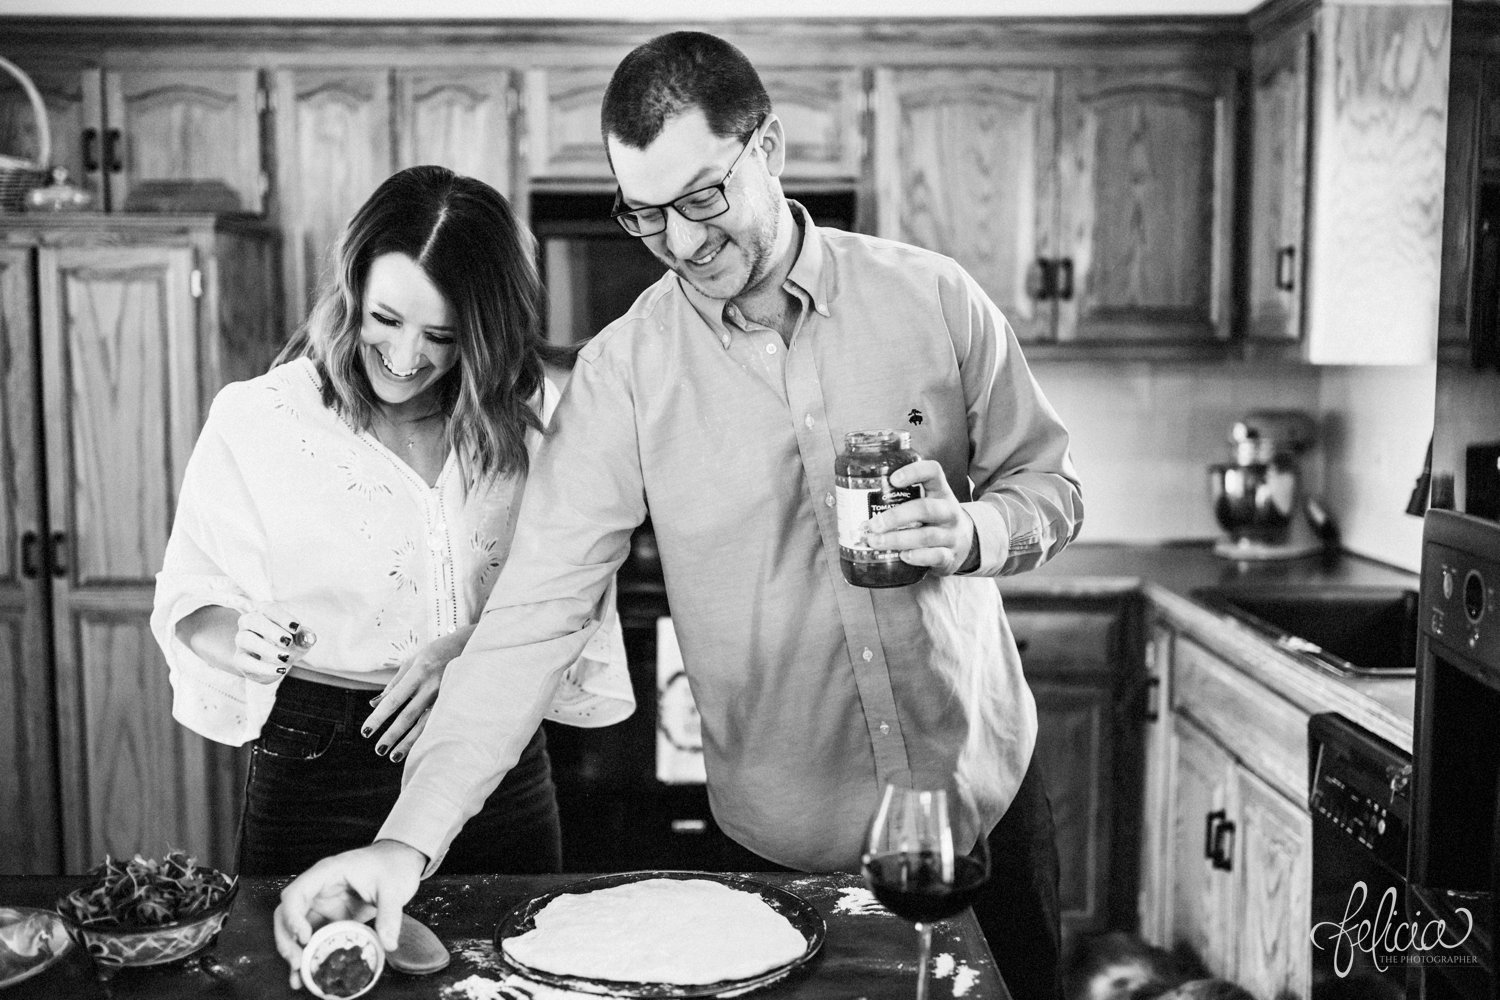 images by feliciathephotographer.com | destination photographer | engagement session | in home | lifestyle | kansas city | cooking from scratch | ingredients | crust | pizza | flour | details | romantic | black and white | silly | playful | 